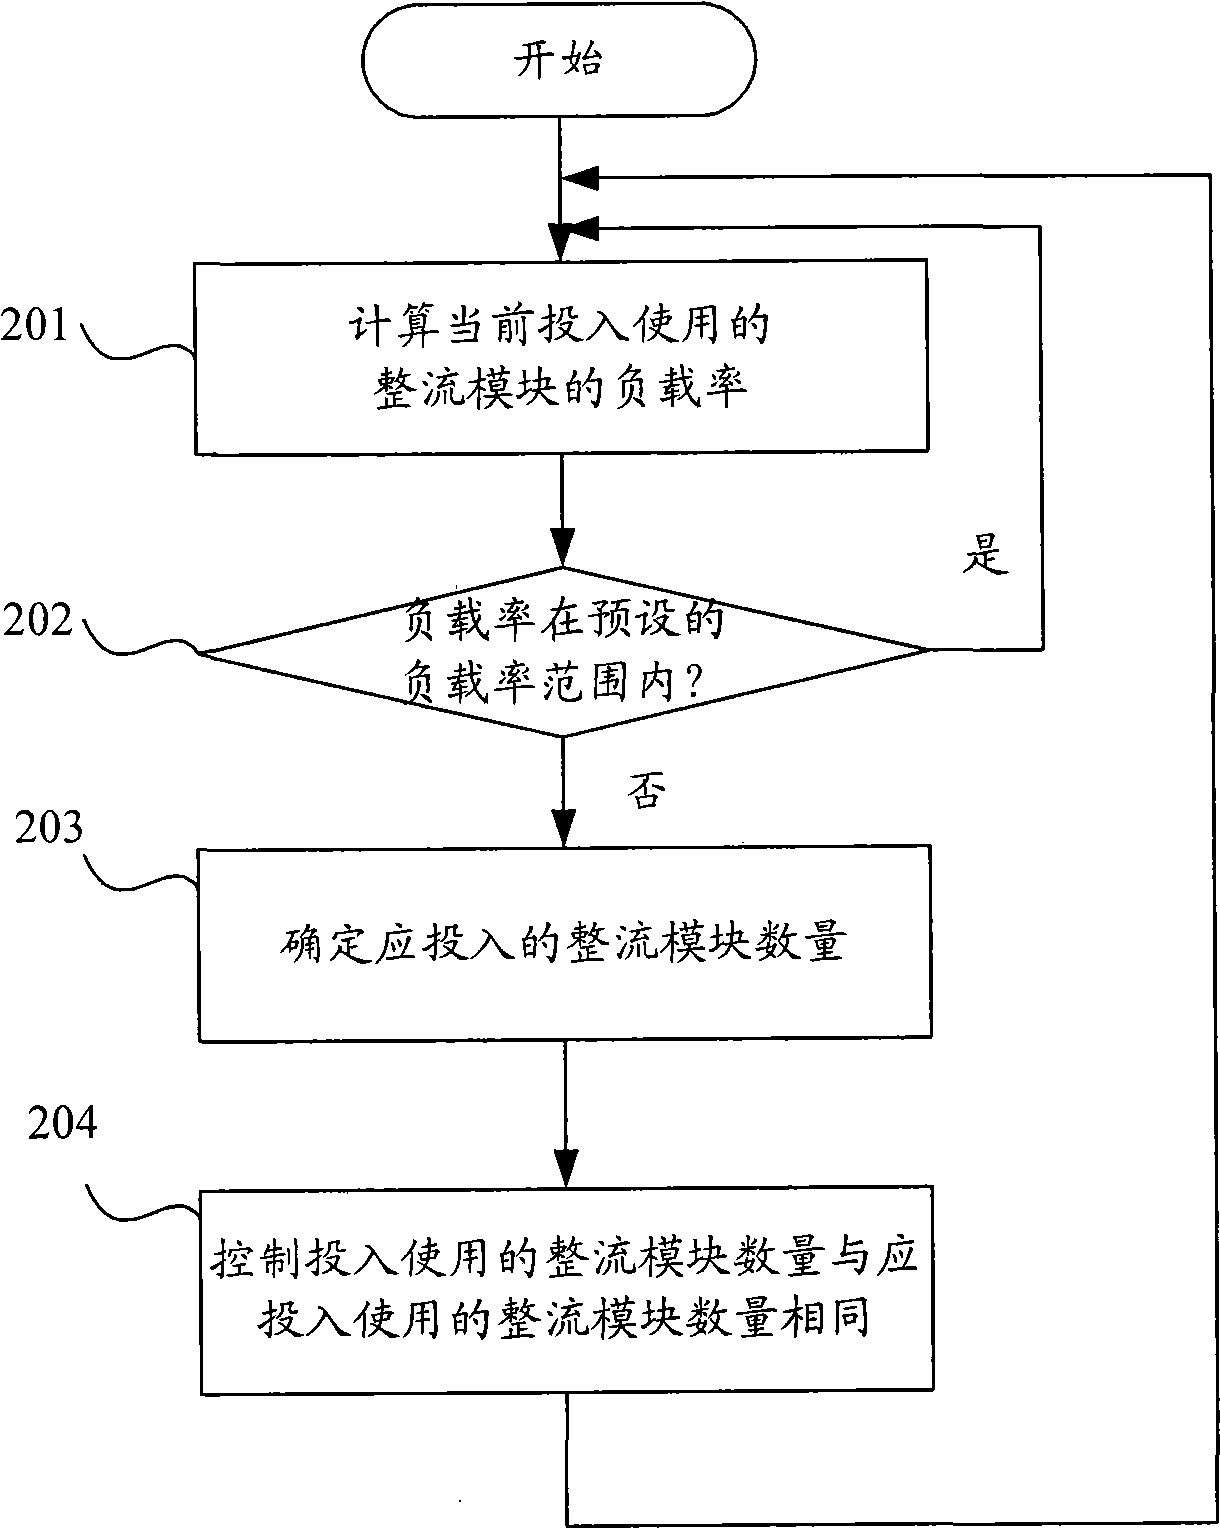 Electric power system control method and apparatus